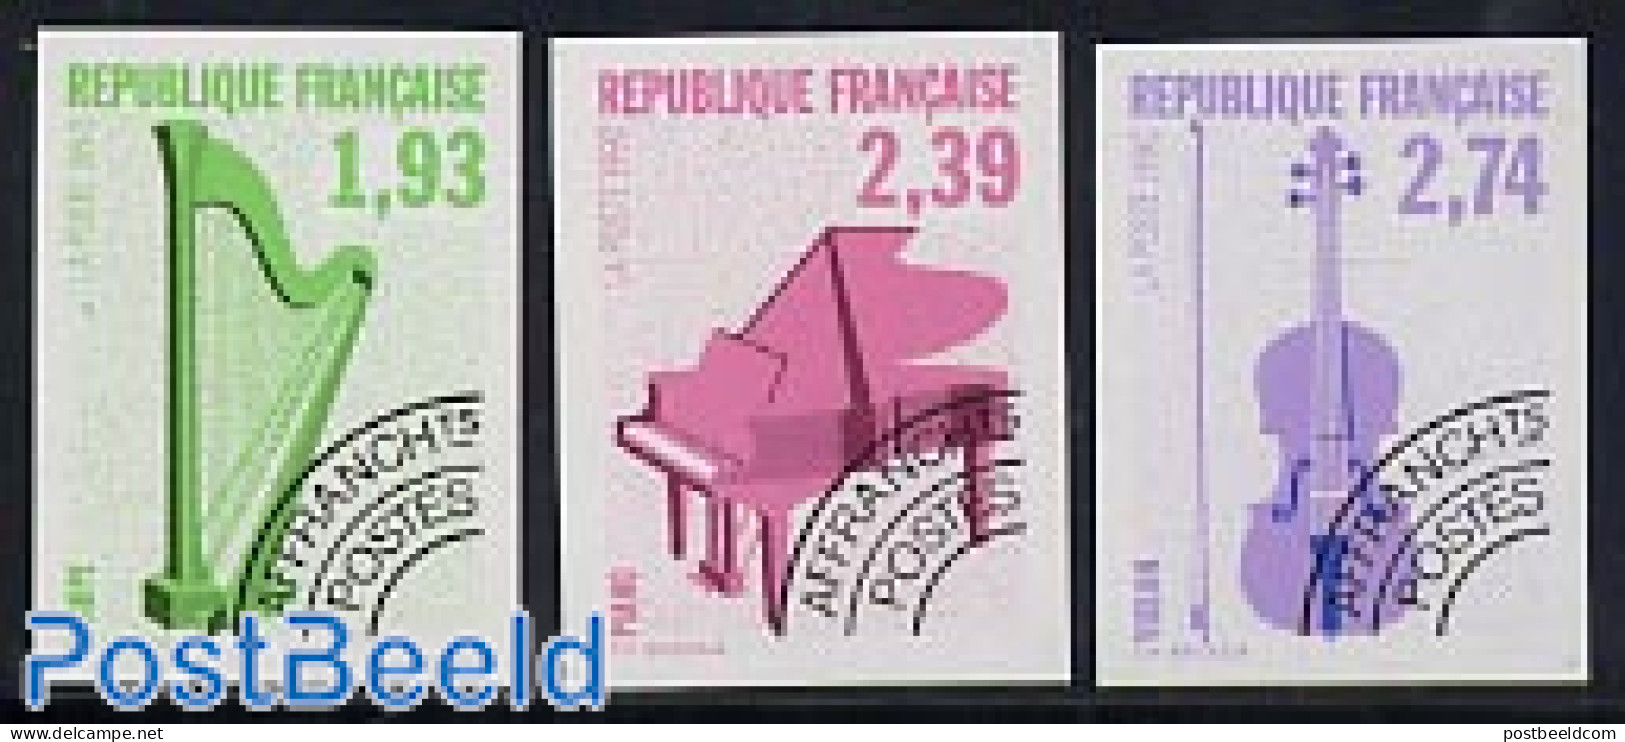 France 1990 Music Instruments 3v Imperforated, Mint NH, Performance Art - Music - Musical Instruments - Unused Stamps